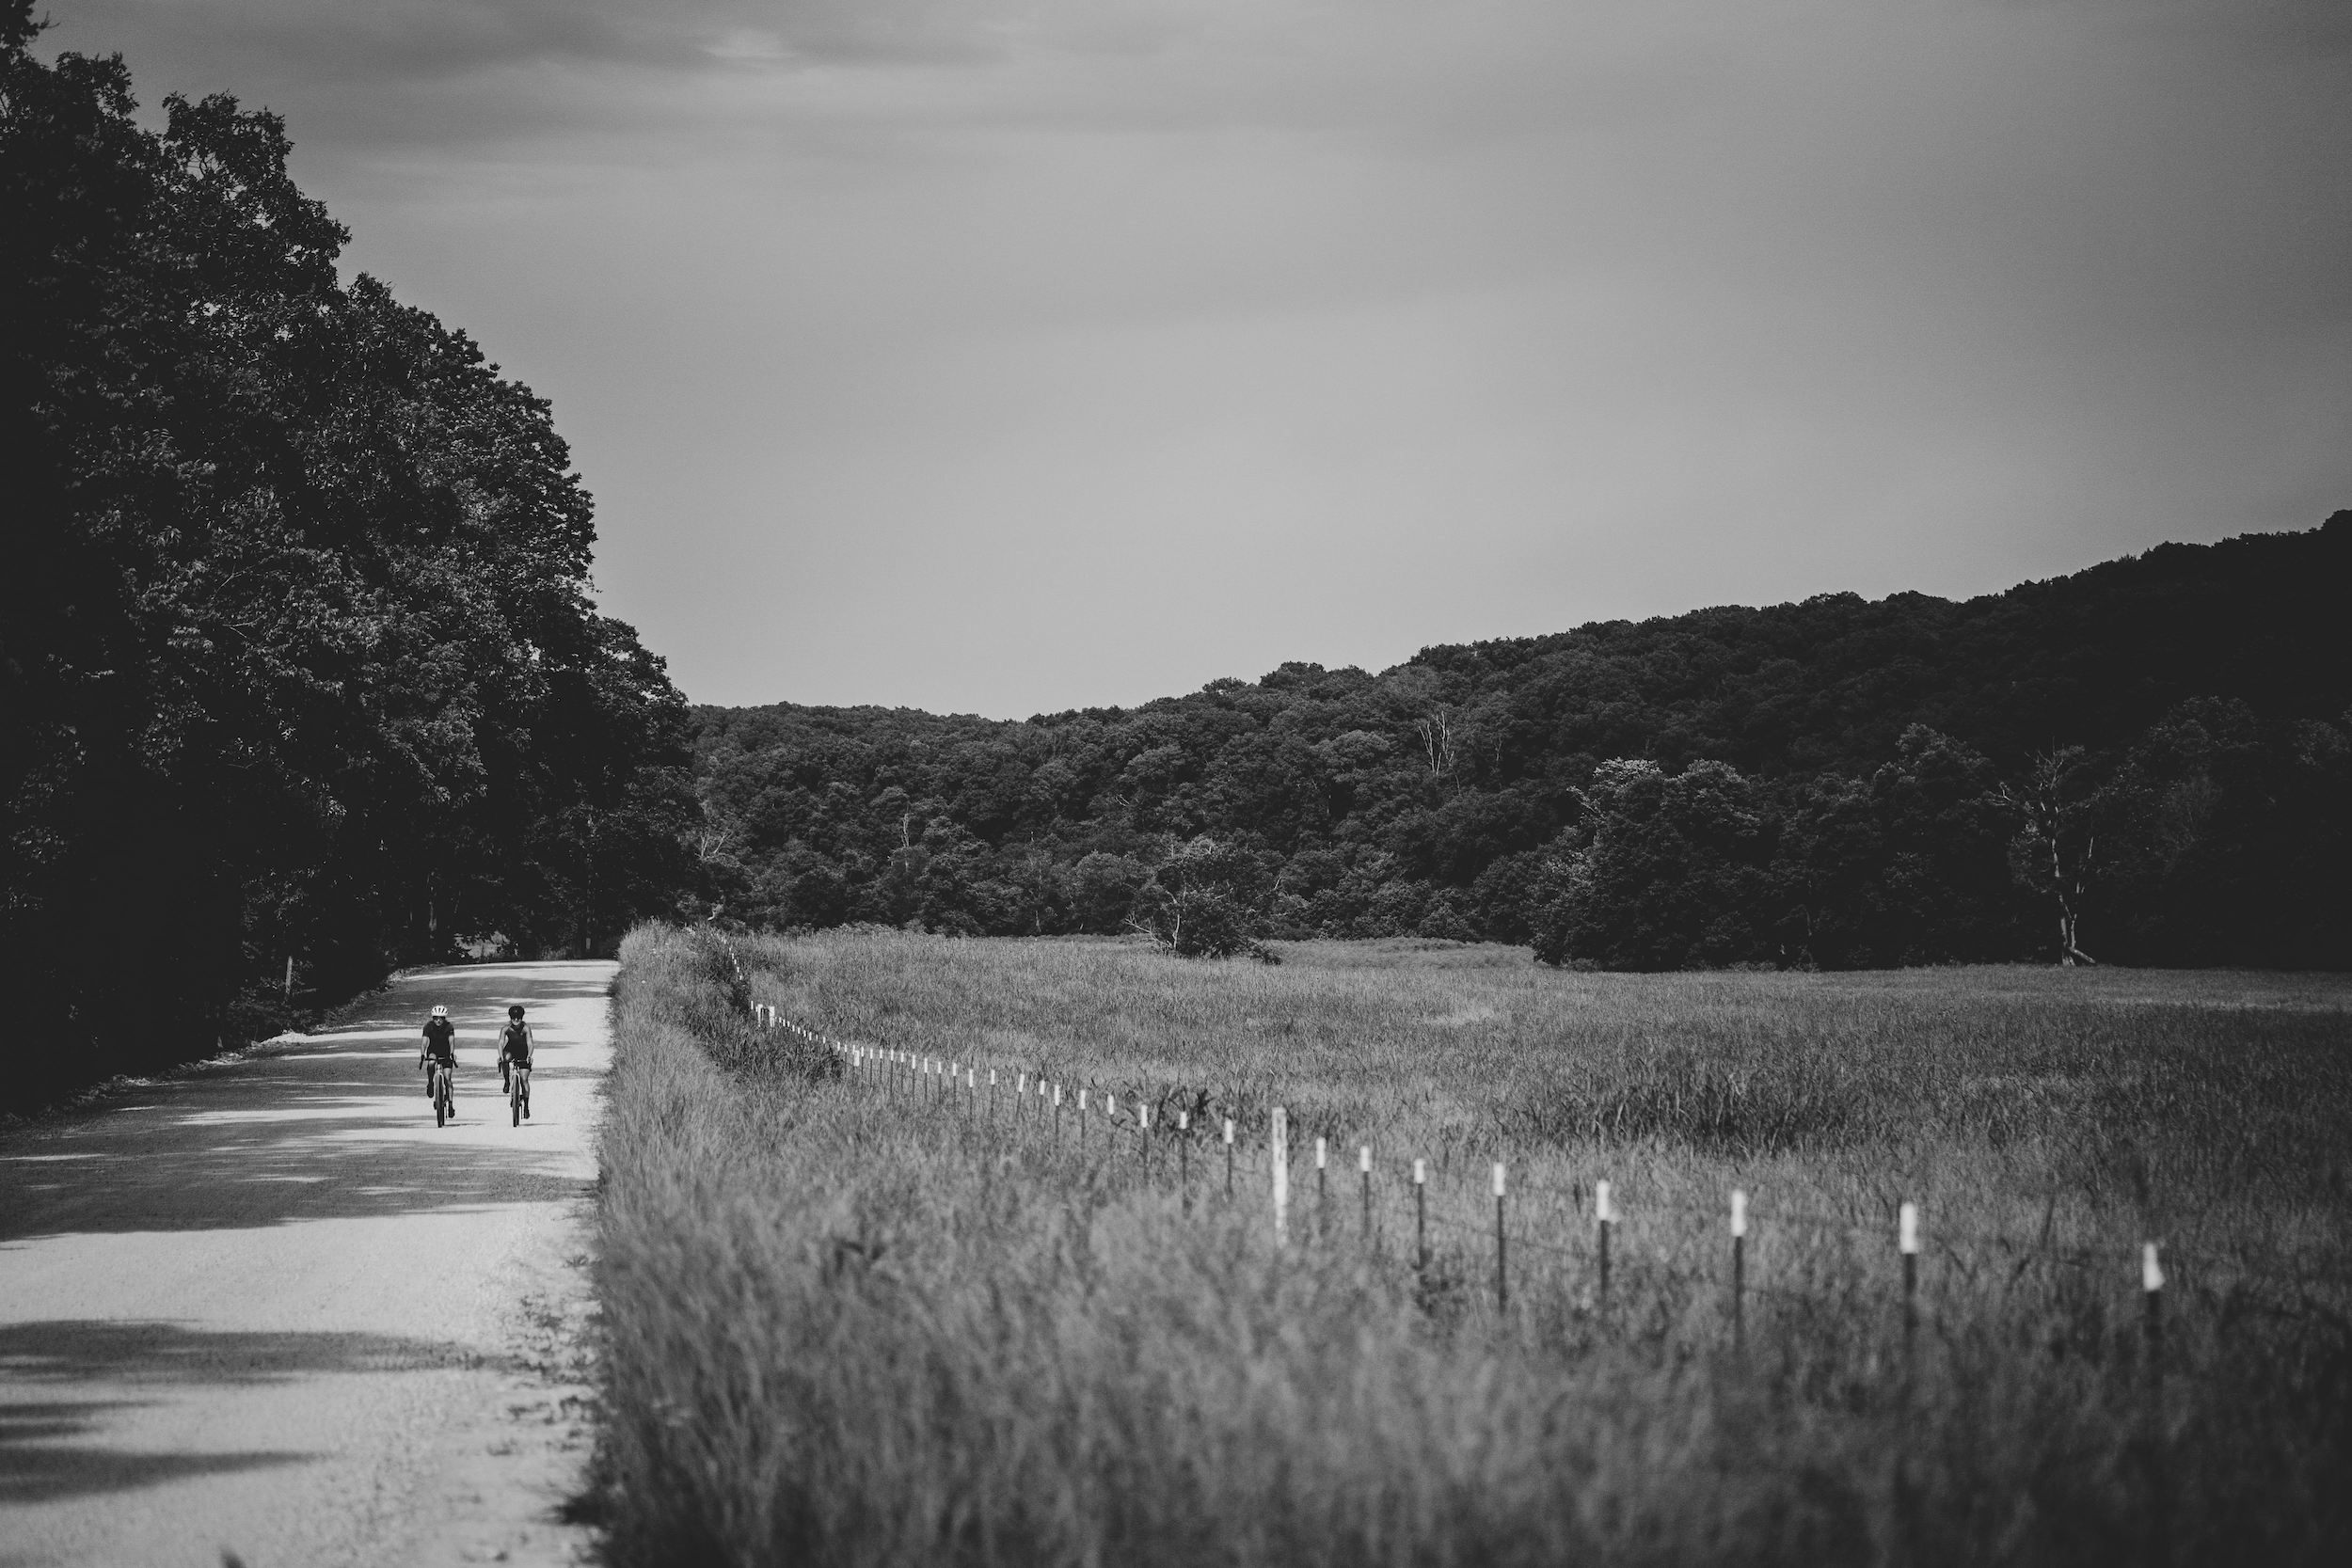 Two people ride their bike down a gravel road in the black and white photo.